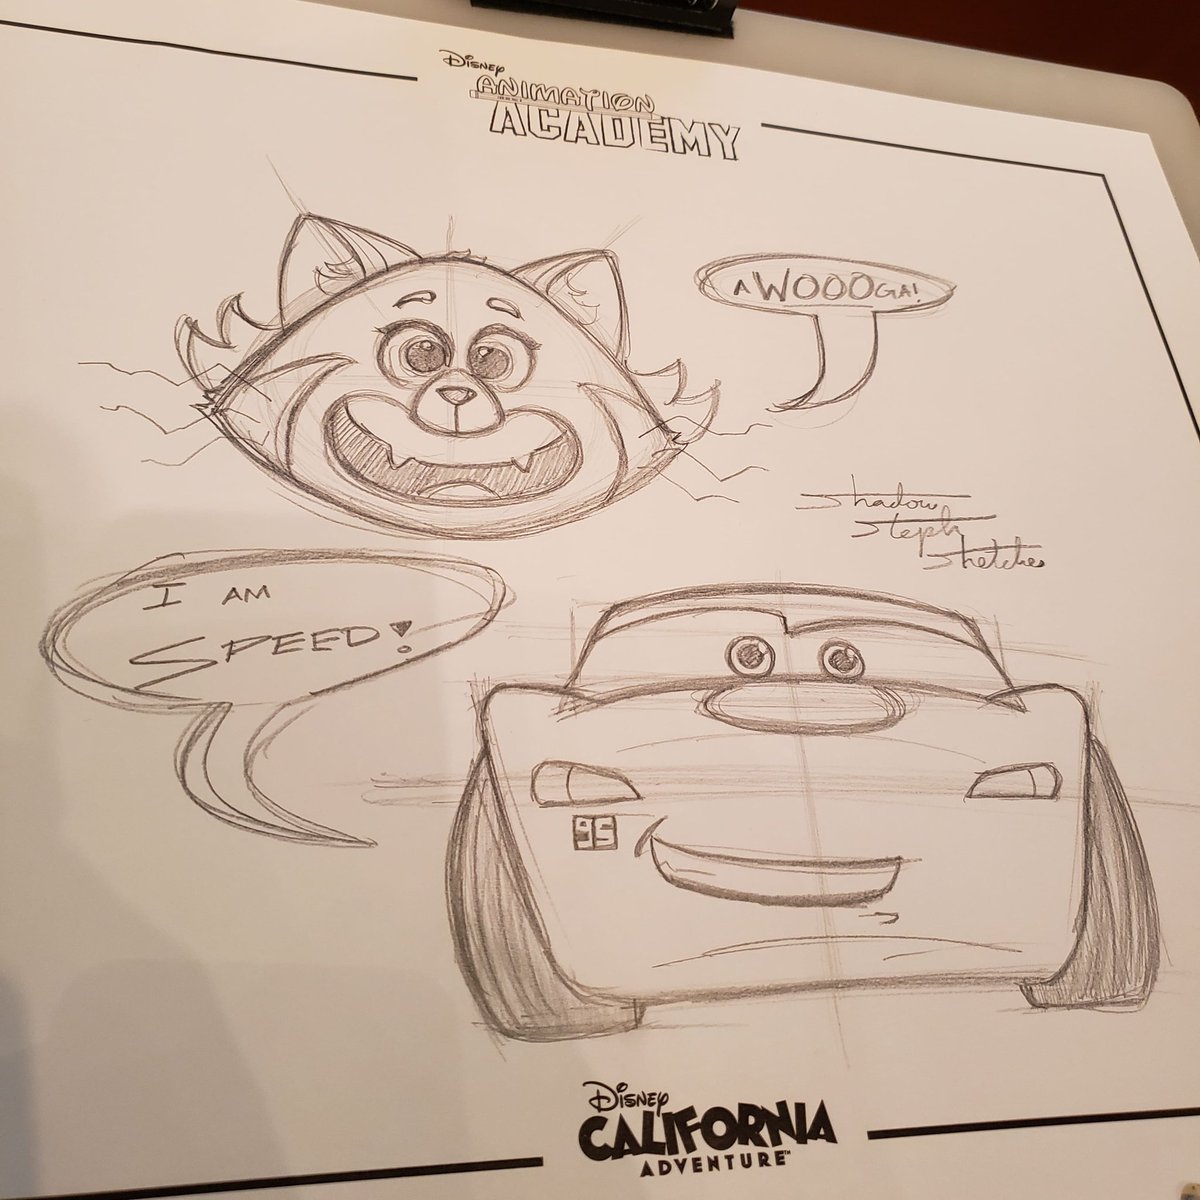 So I took an Animation Academy class at California Adventure and they had me draw Mei Mei and Lightning McQueen.

Disney please hire me...

#Pixar #PixarSketches #Disney #DisneyWorld #CaliforniaAdventure #AnimationAcademy #Cars #TurningRed #LightningMcqueen #MeiMei #RoughSketch